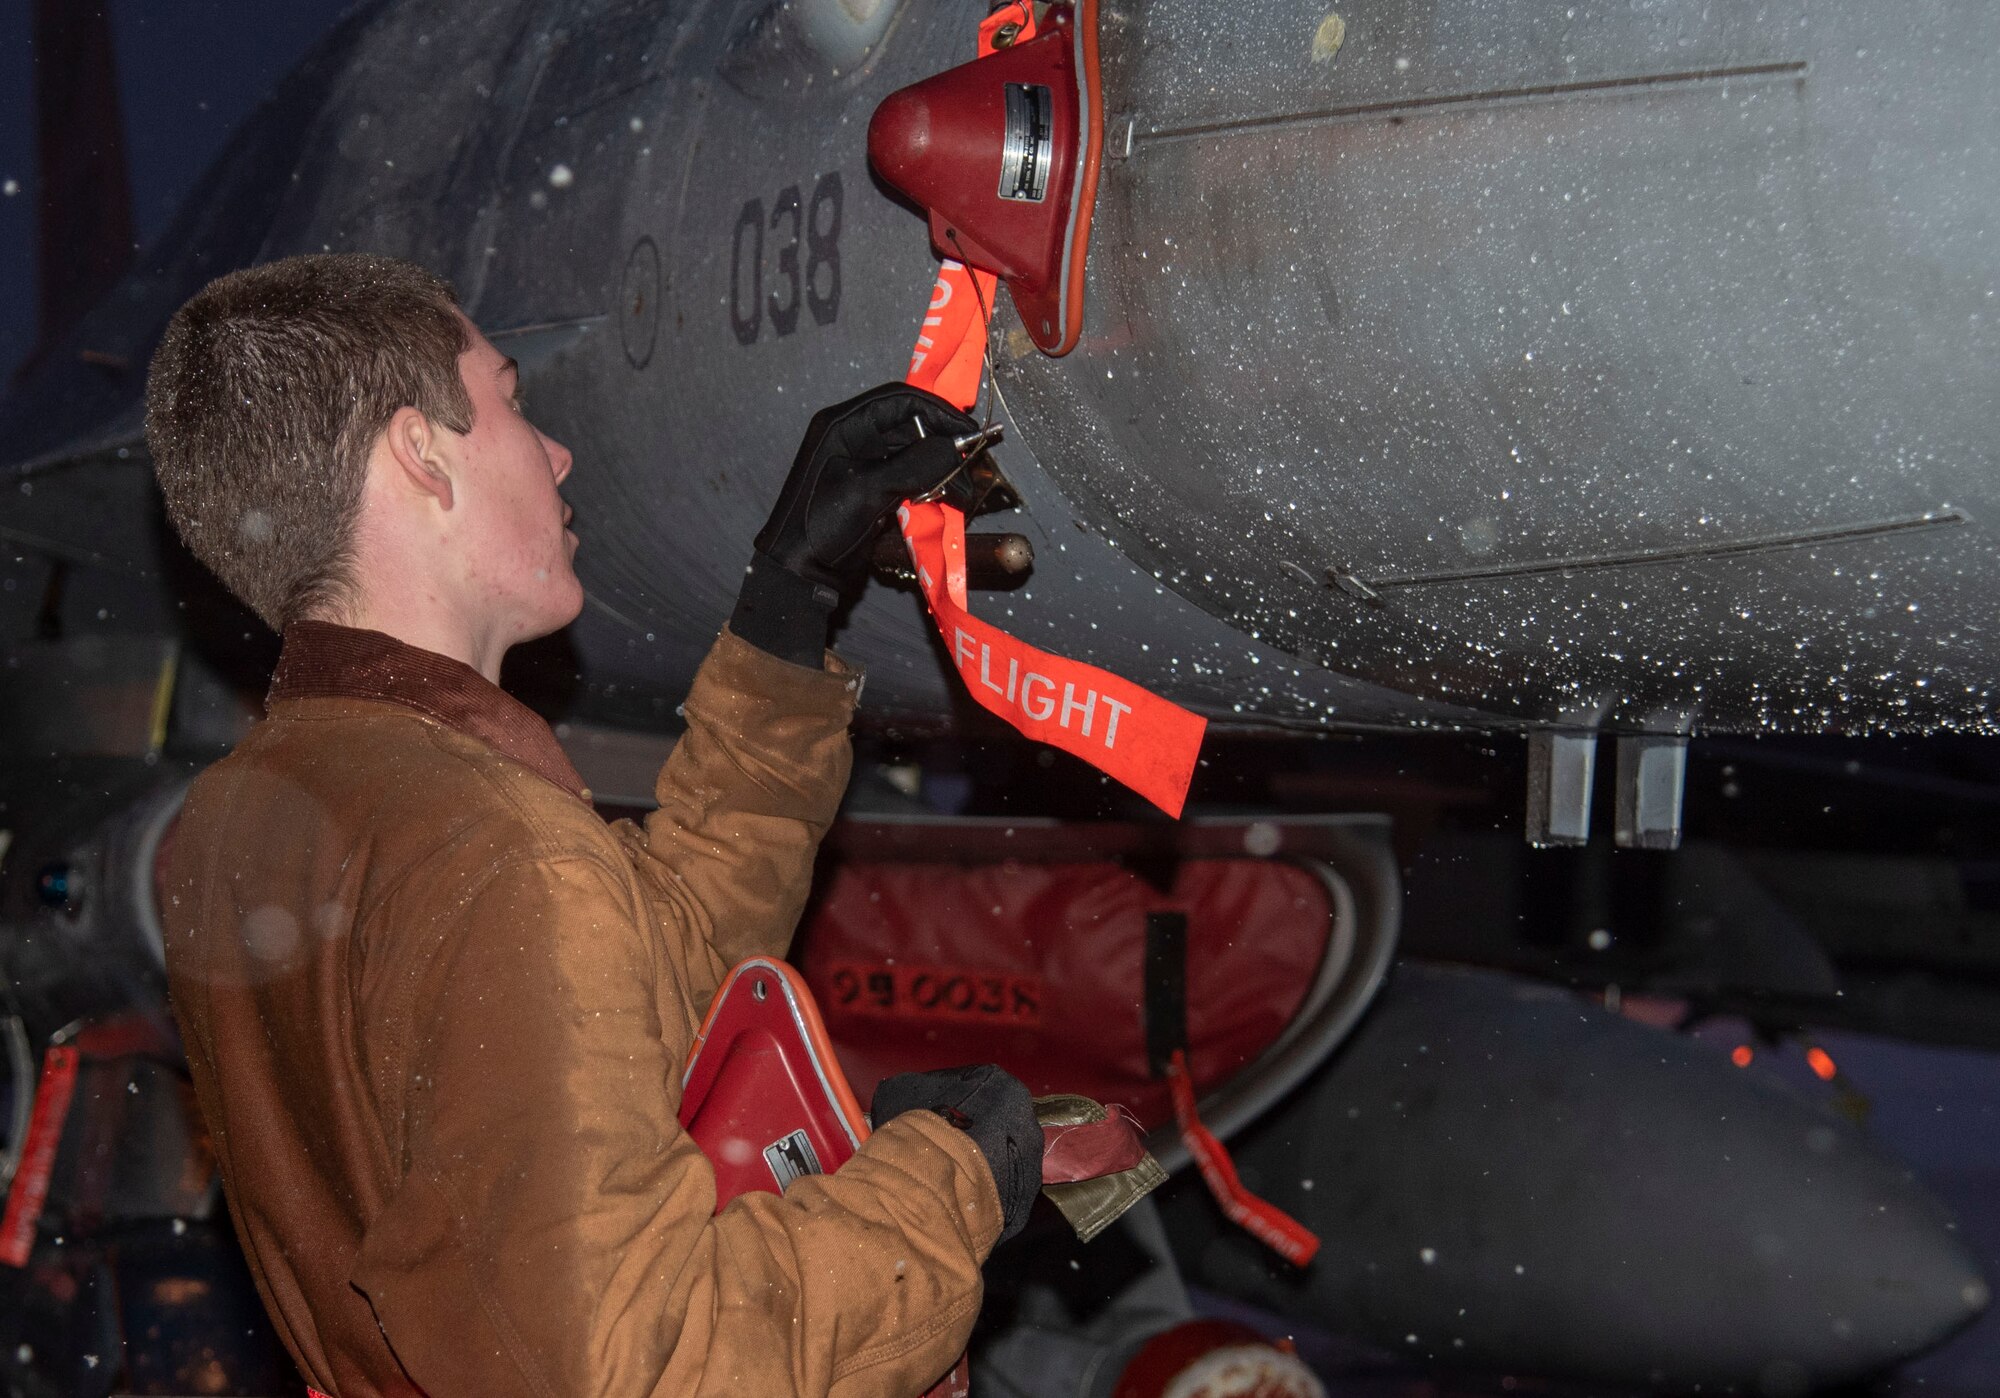 U.S. Air Force Airman 1st Class Avery Fortenbery, a 13th Aircraft Maintenance Unit crew chief, installs the lower pin on an F-16 Fighting Falcon at Misawa Air Base, Japan, Dec. 11, 2018. The aircraft-safe maintenance procedures communicate to the rest of the crew the aircraft is cleared to have post-flight maintenance work performed on it. (U.S. Air Force photo by Airman 1st Class Genesis Tejada)